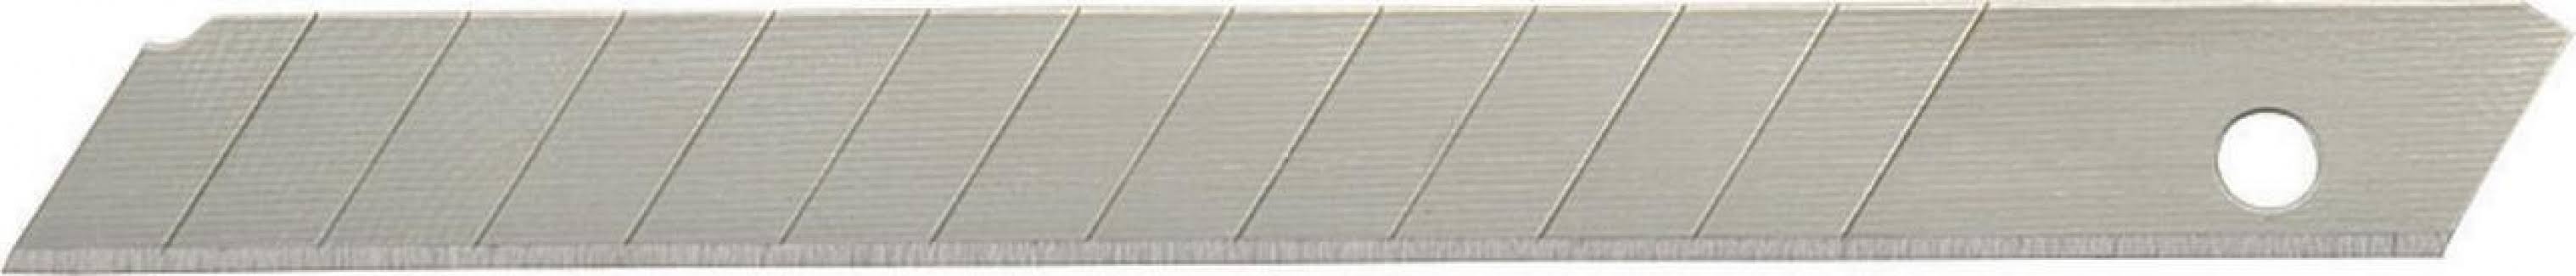 Hyde Tools 42345 Utility Knife Blades, Snap-Off, 9mm | Garage